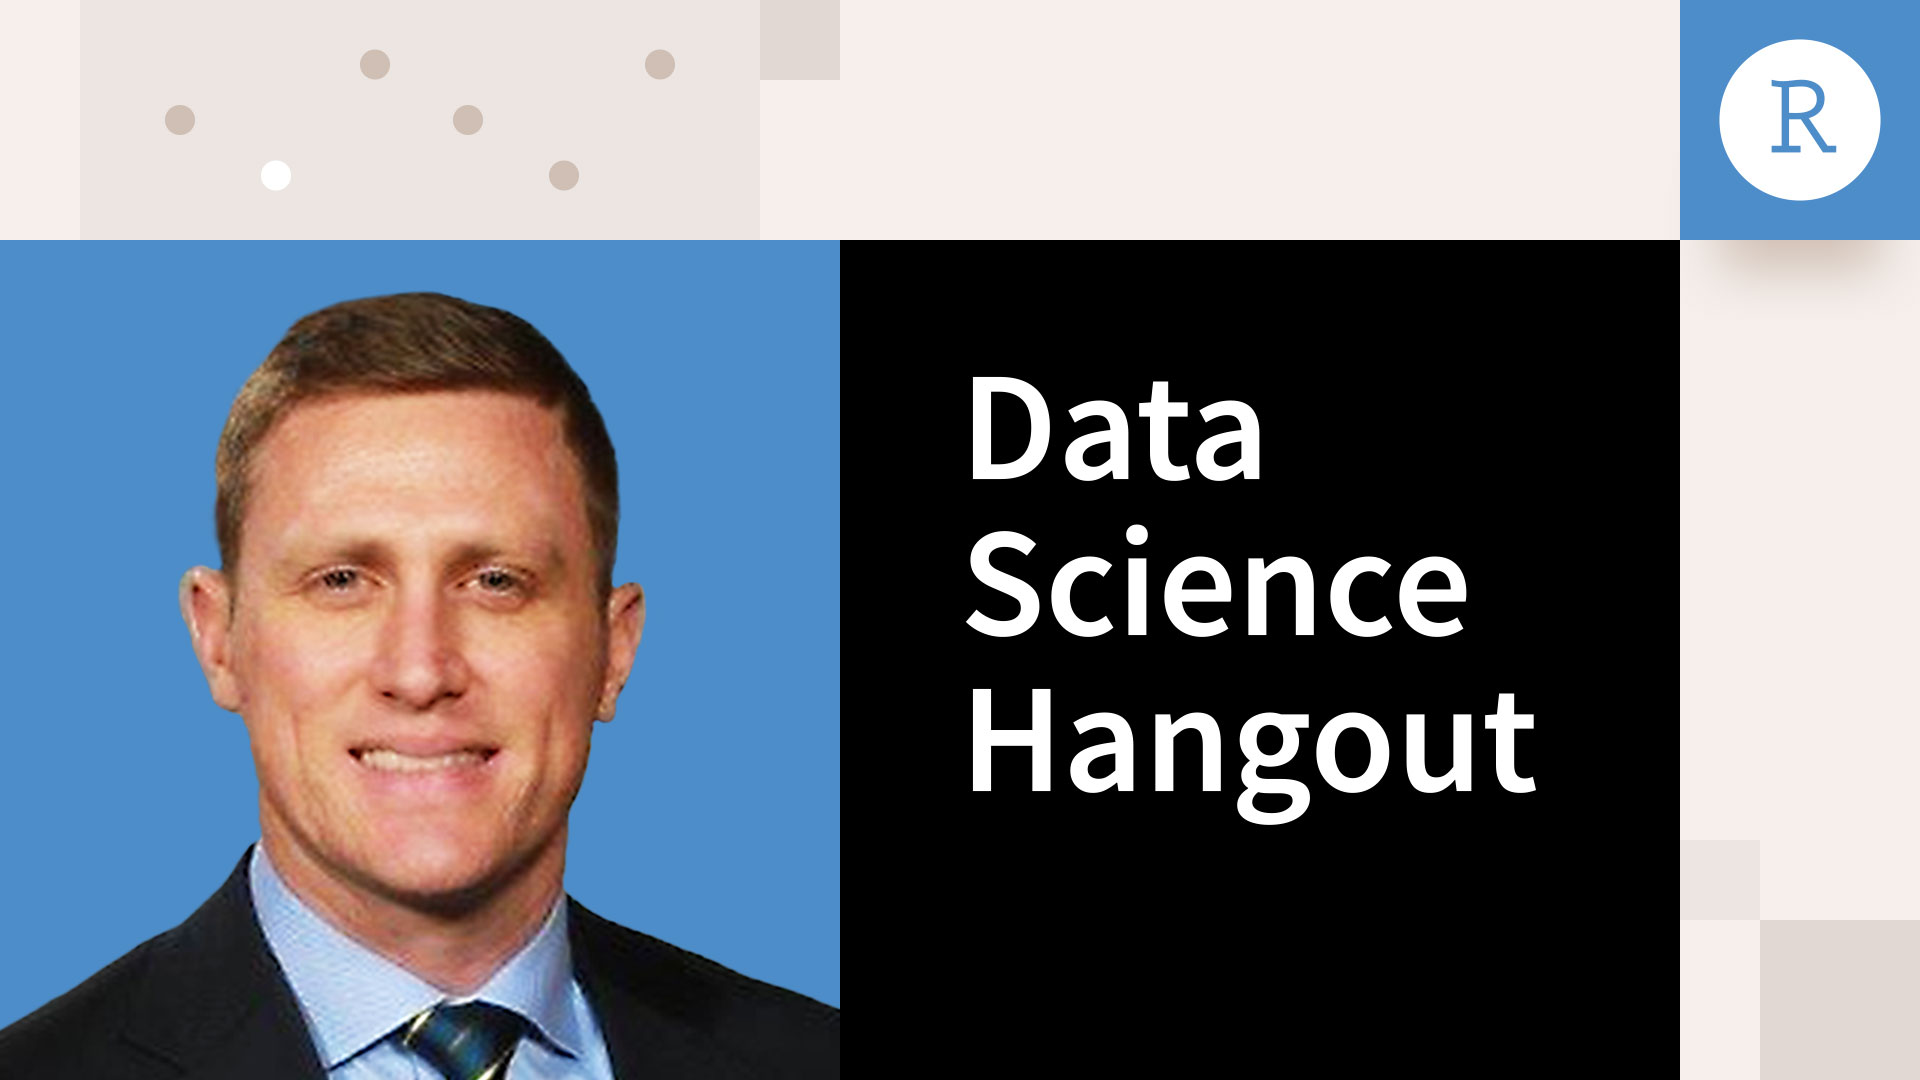 Data Science Hangout with Ian Anderson